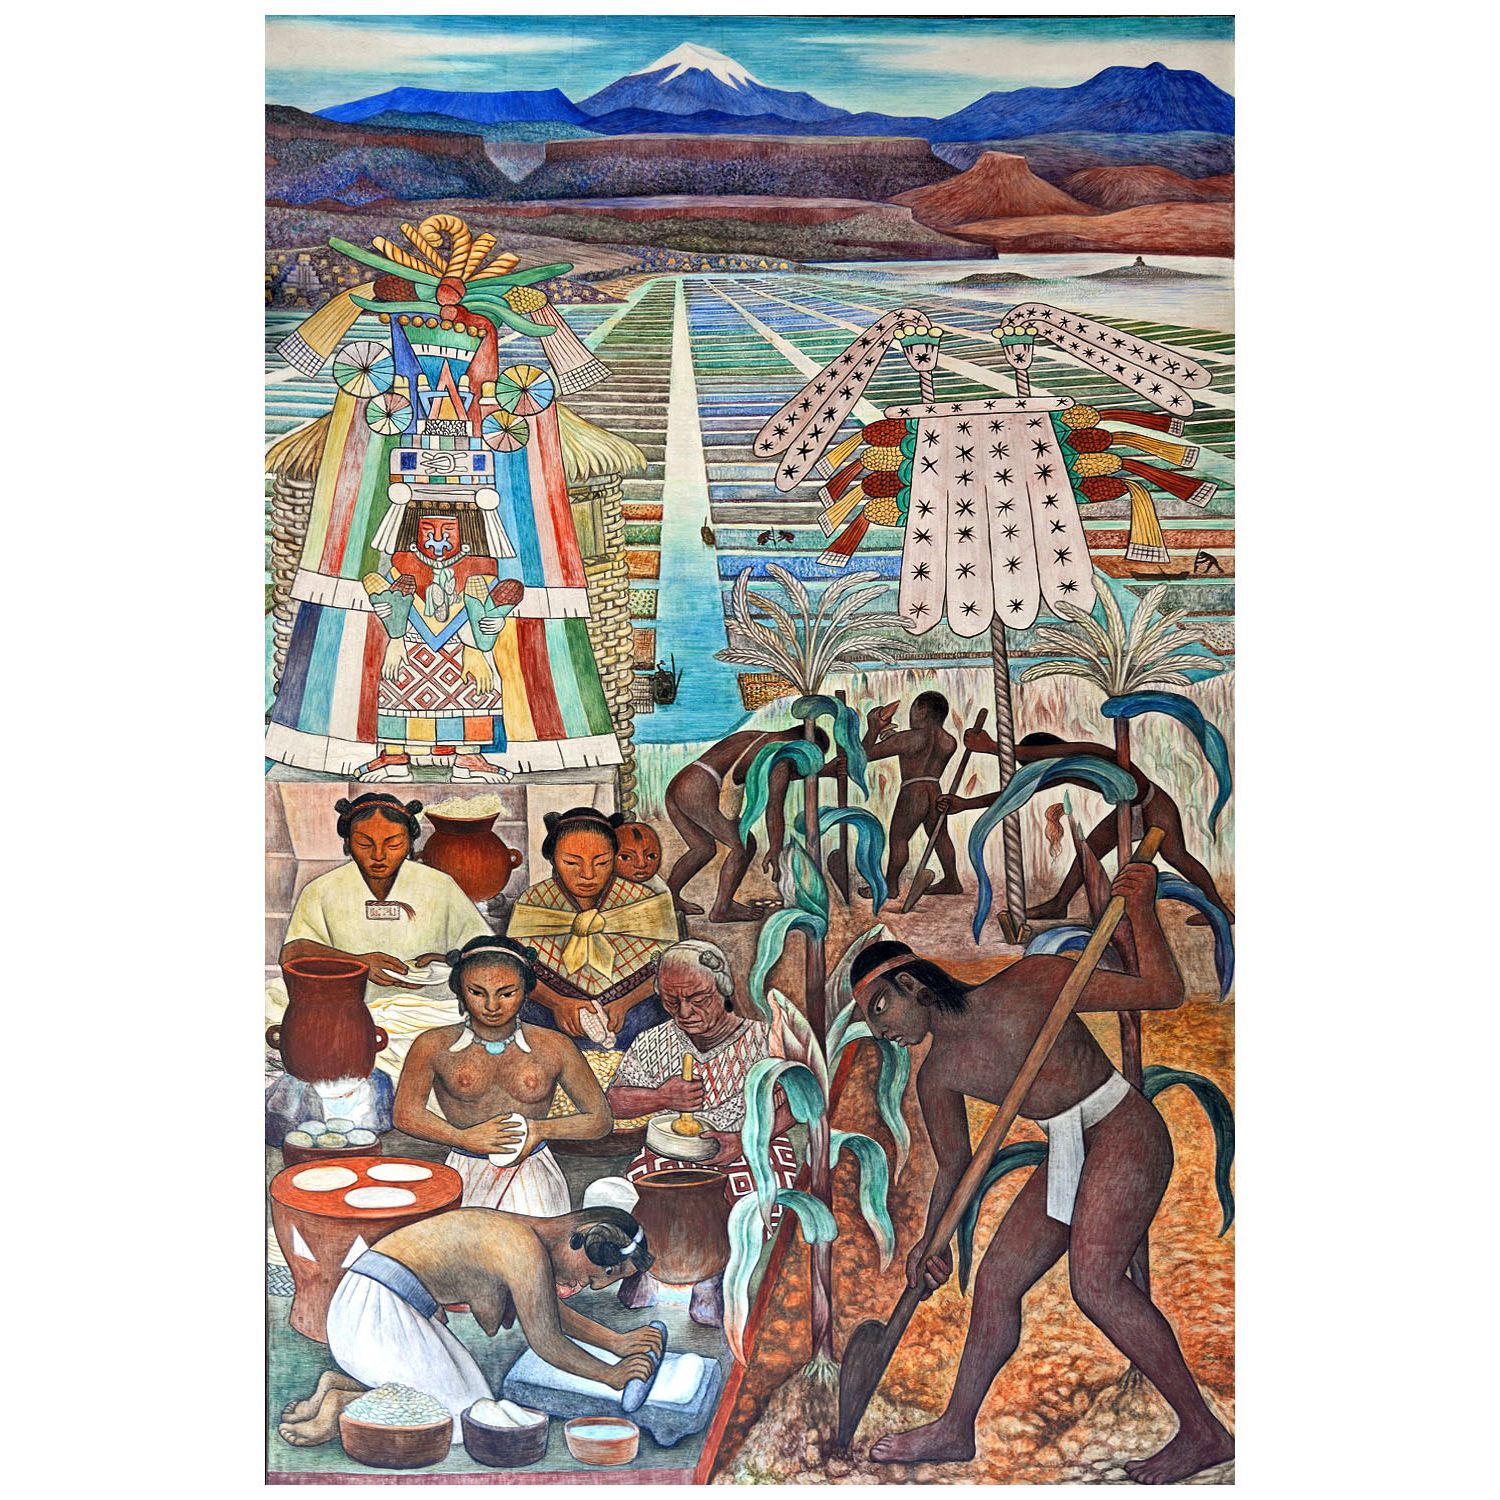 Diego Rivera. The Cultivation of Corn. 1942. Mural in the National Palace.